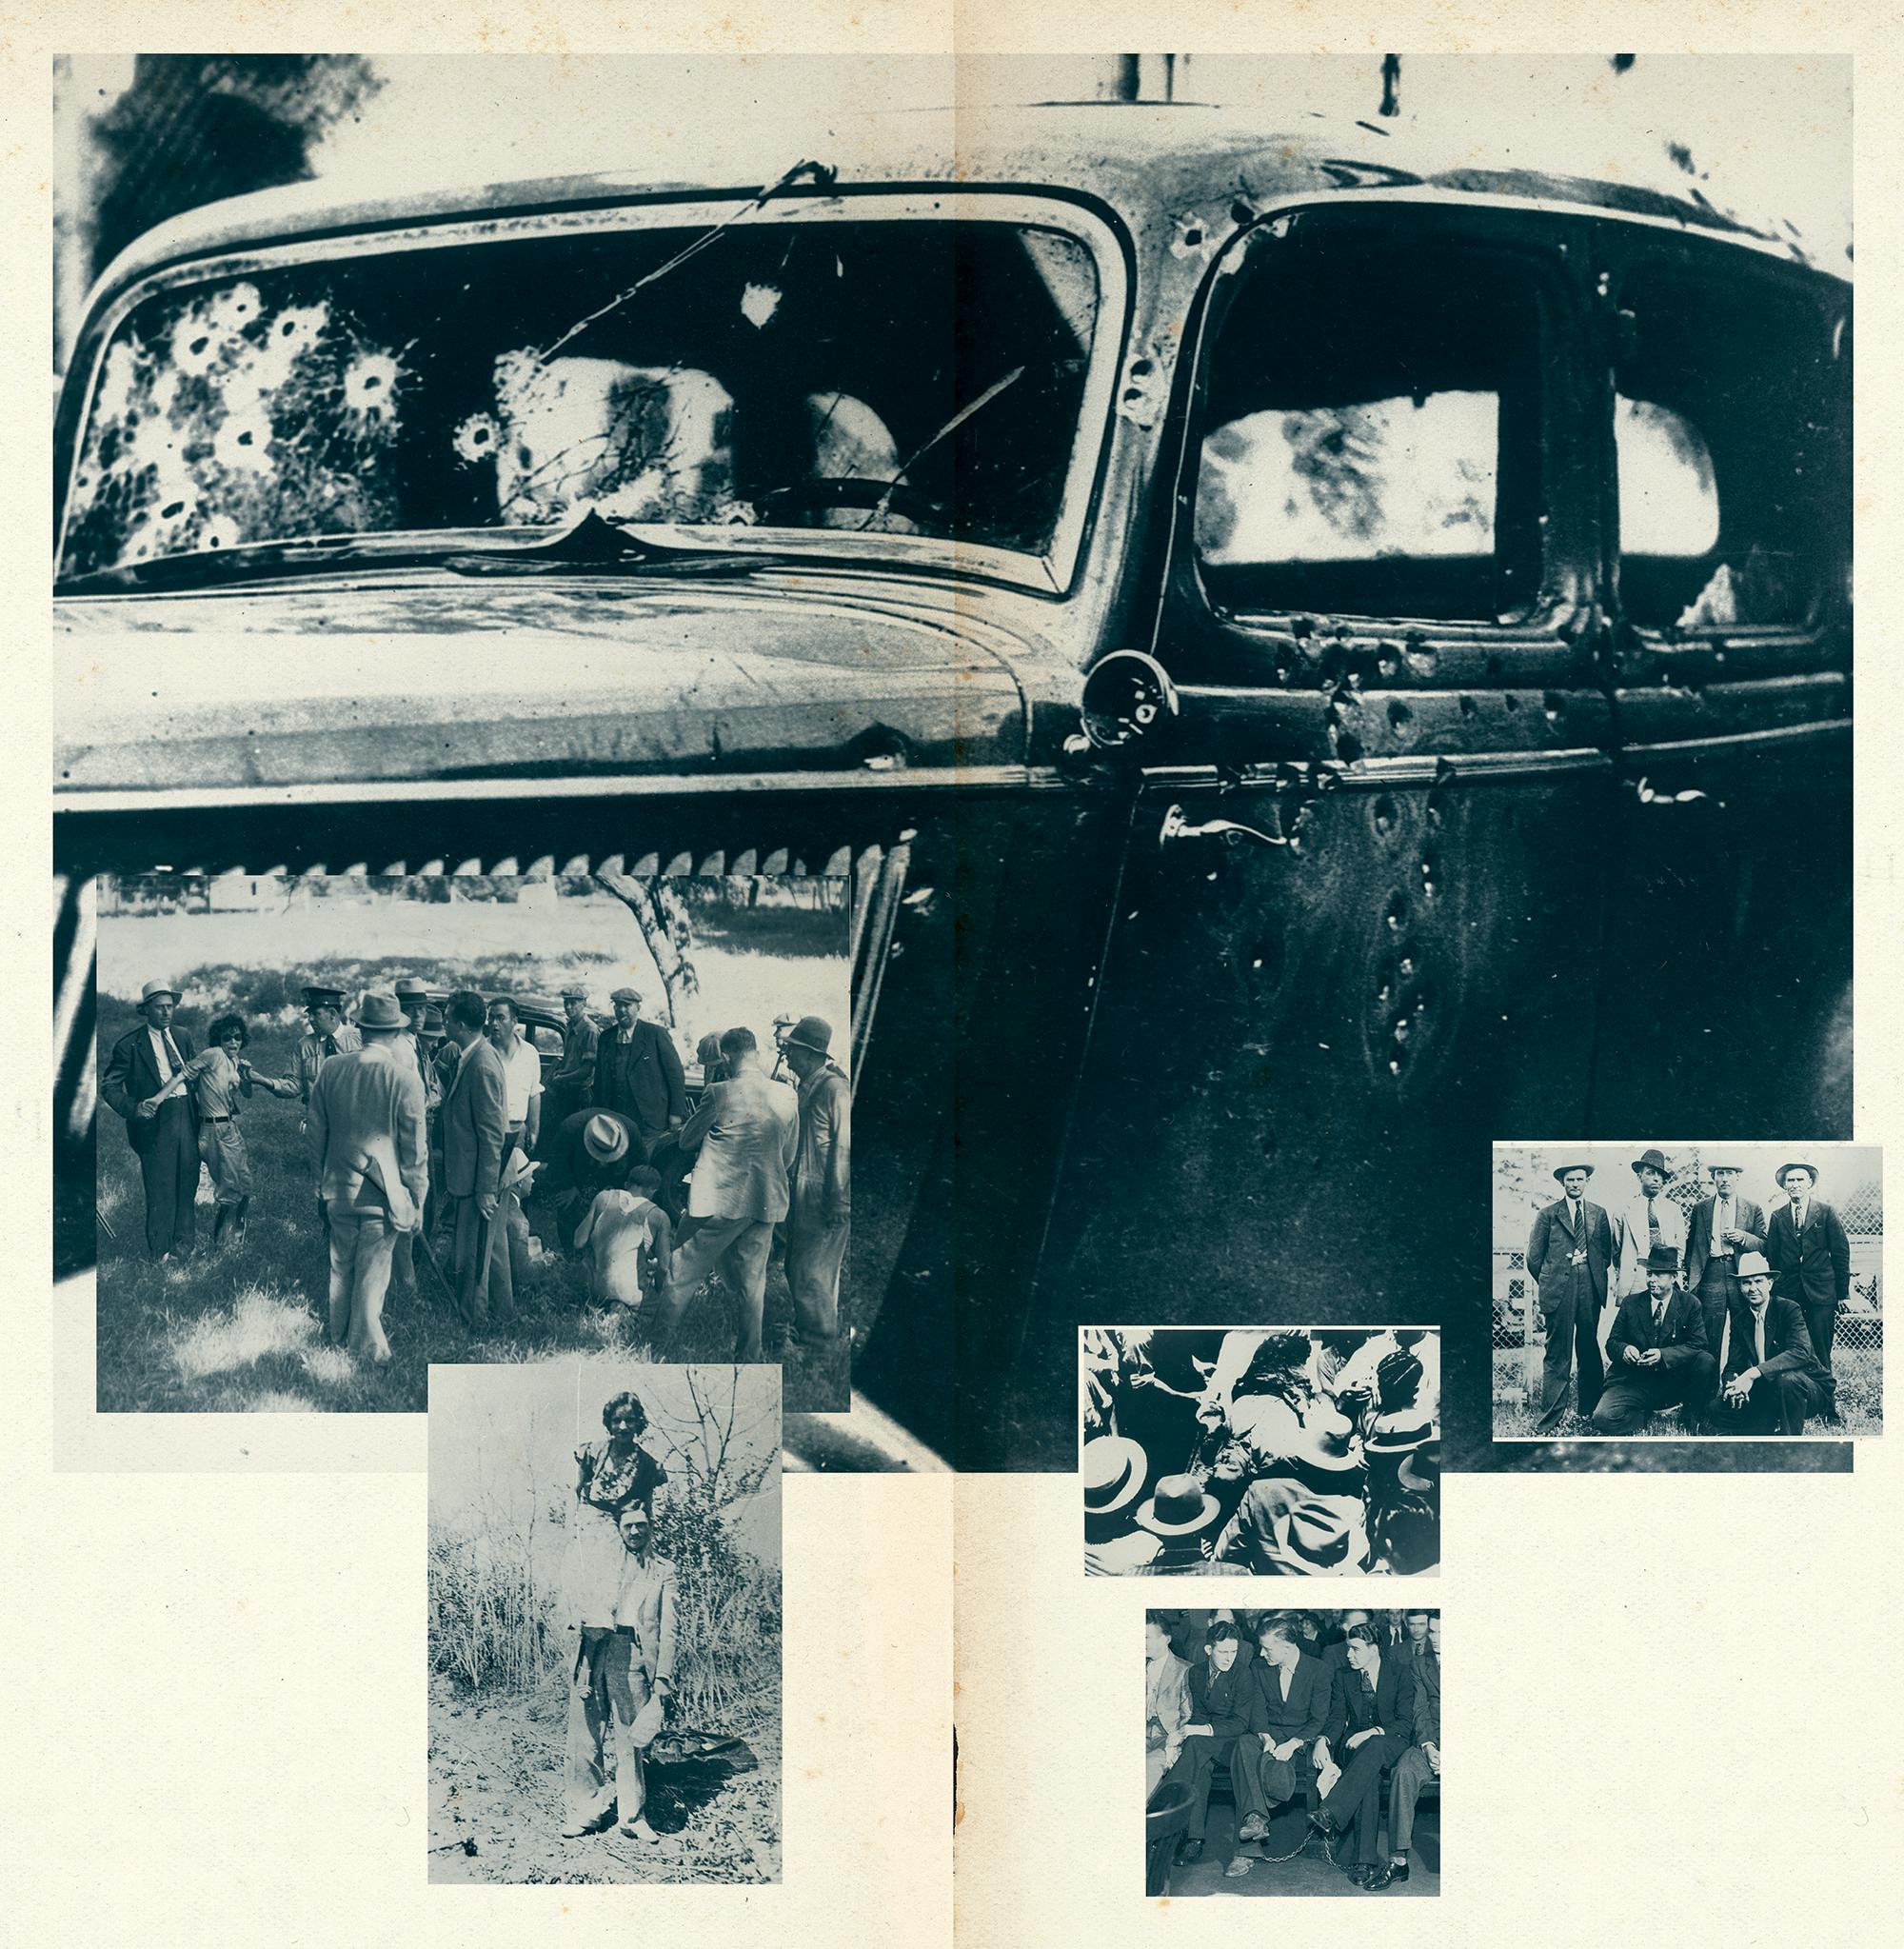 Old automobile riddled with bullet holes, among pictures of Bonnie and Clyde. 